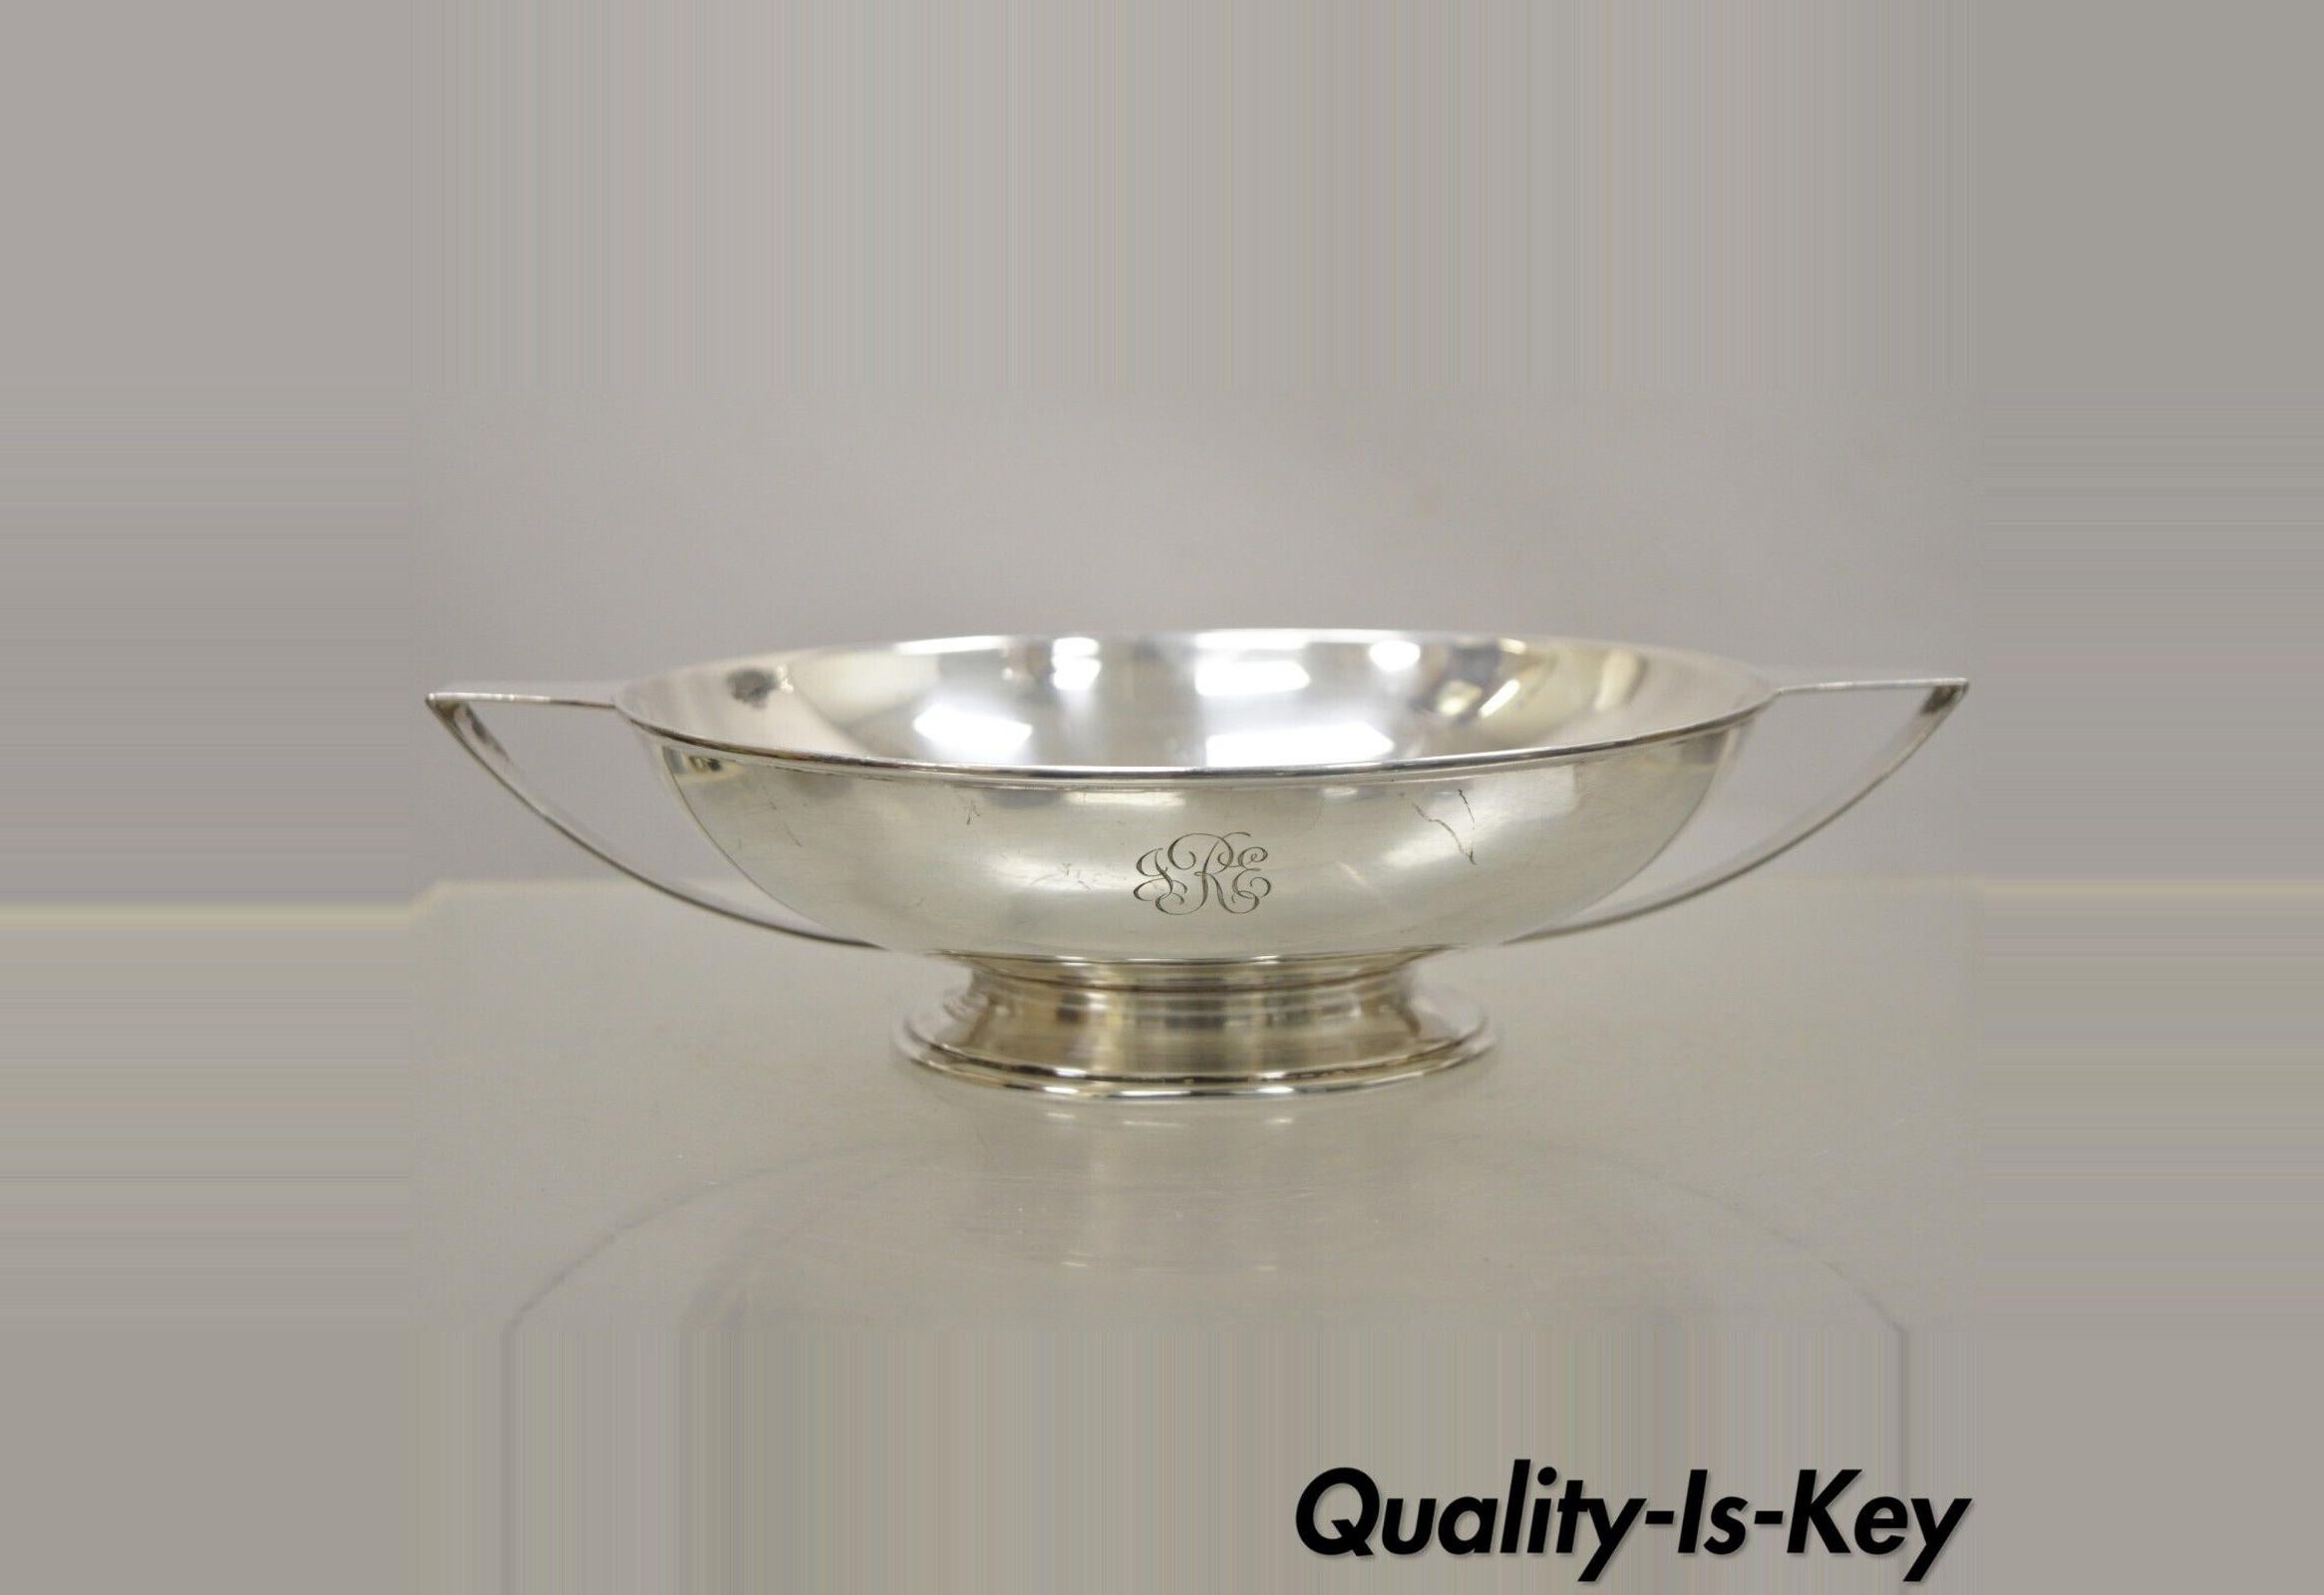 Antique L.B.S. Co. English Sheffield Round Silver Plated Twin Handle Shallow Bowl Dish. Item features Flat twin handles, monogram engraved to front 